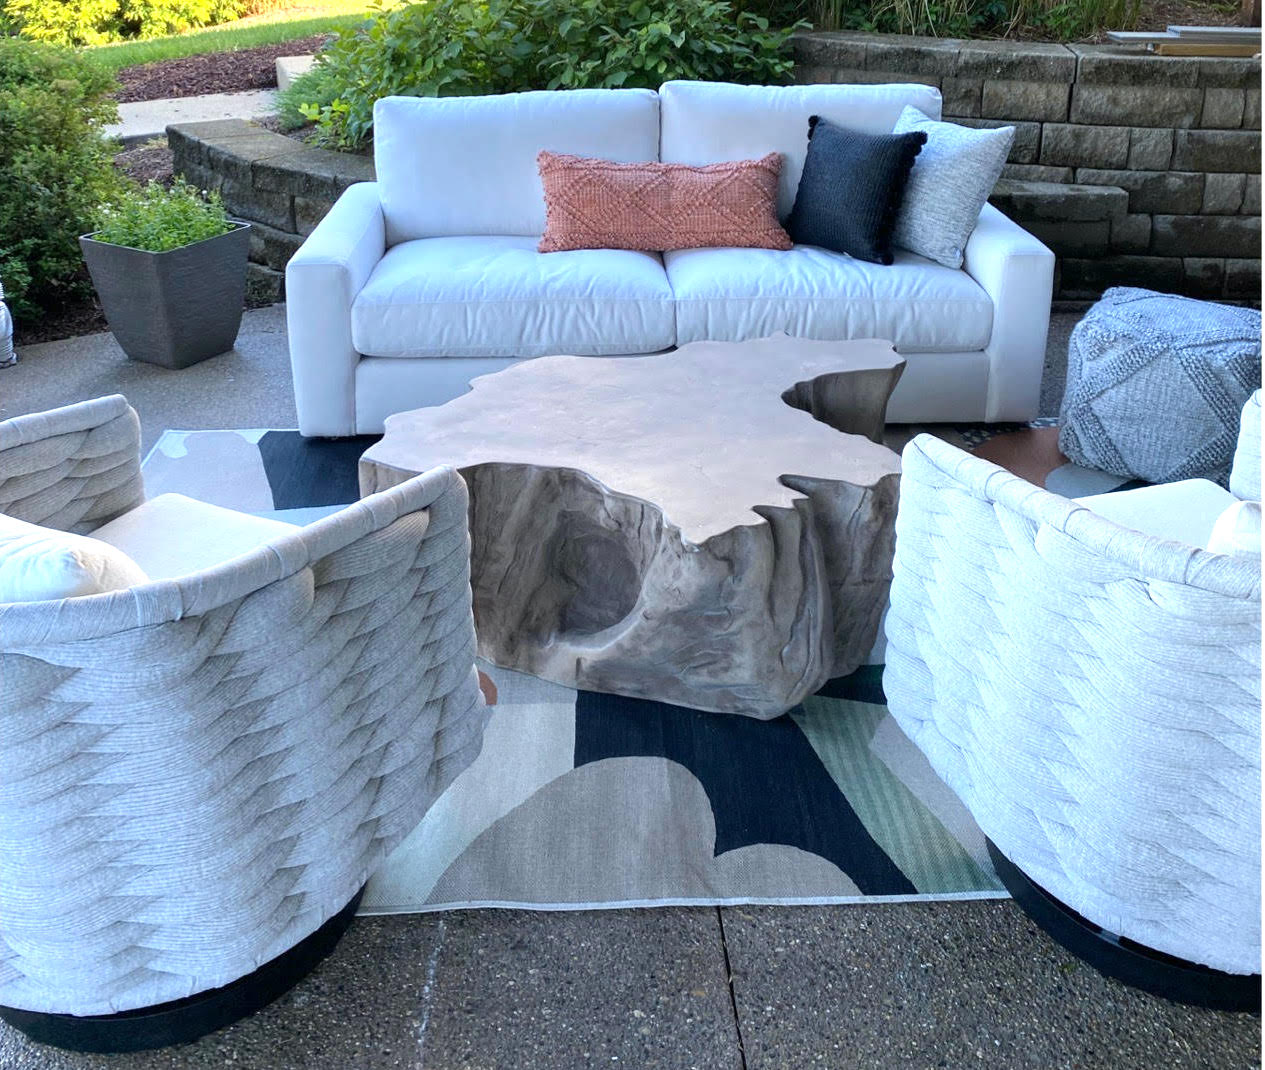 Three outdoor couches with a rug under them